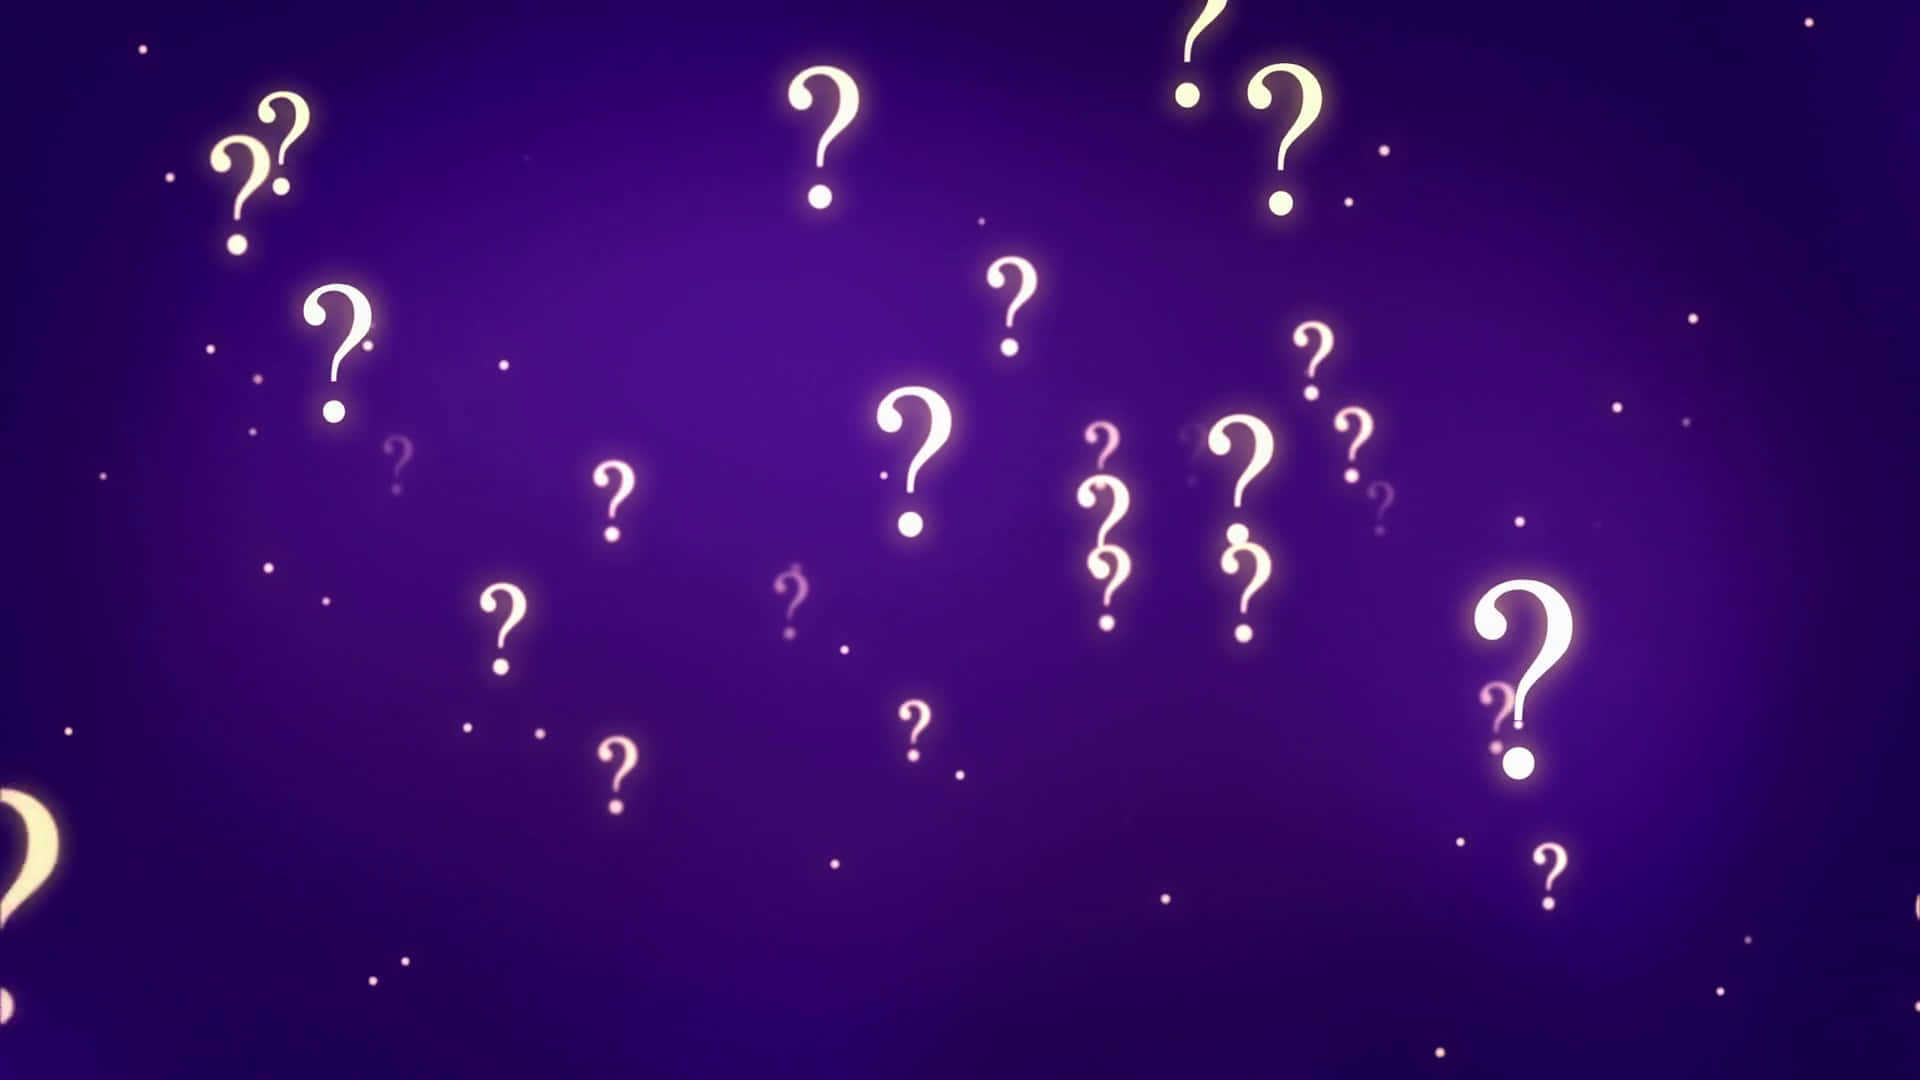 Cool Question Marks Background 7737